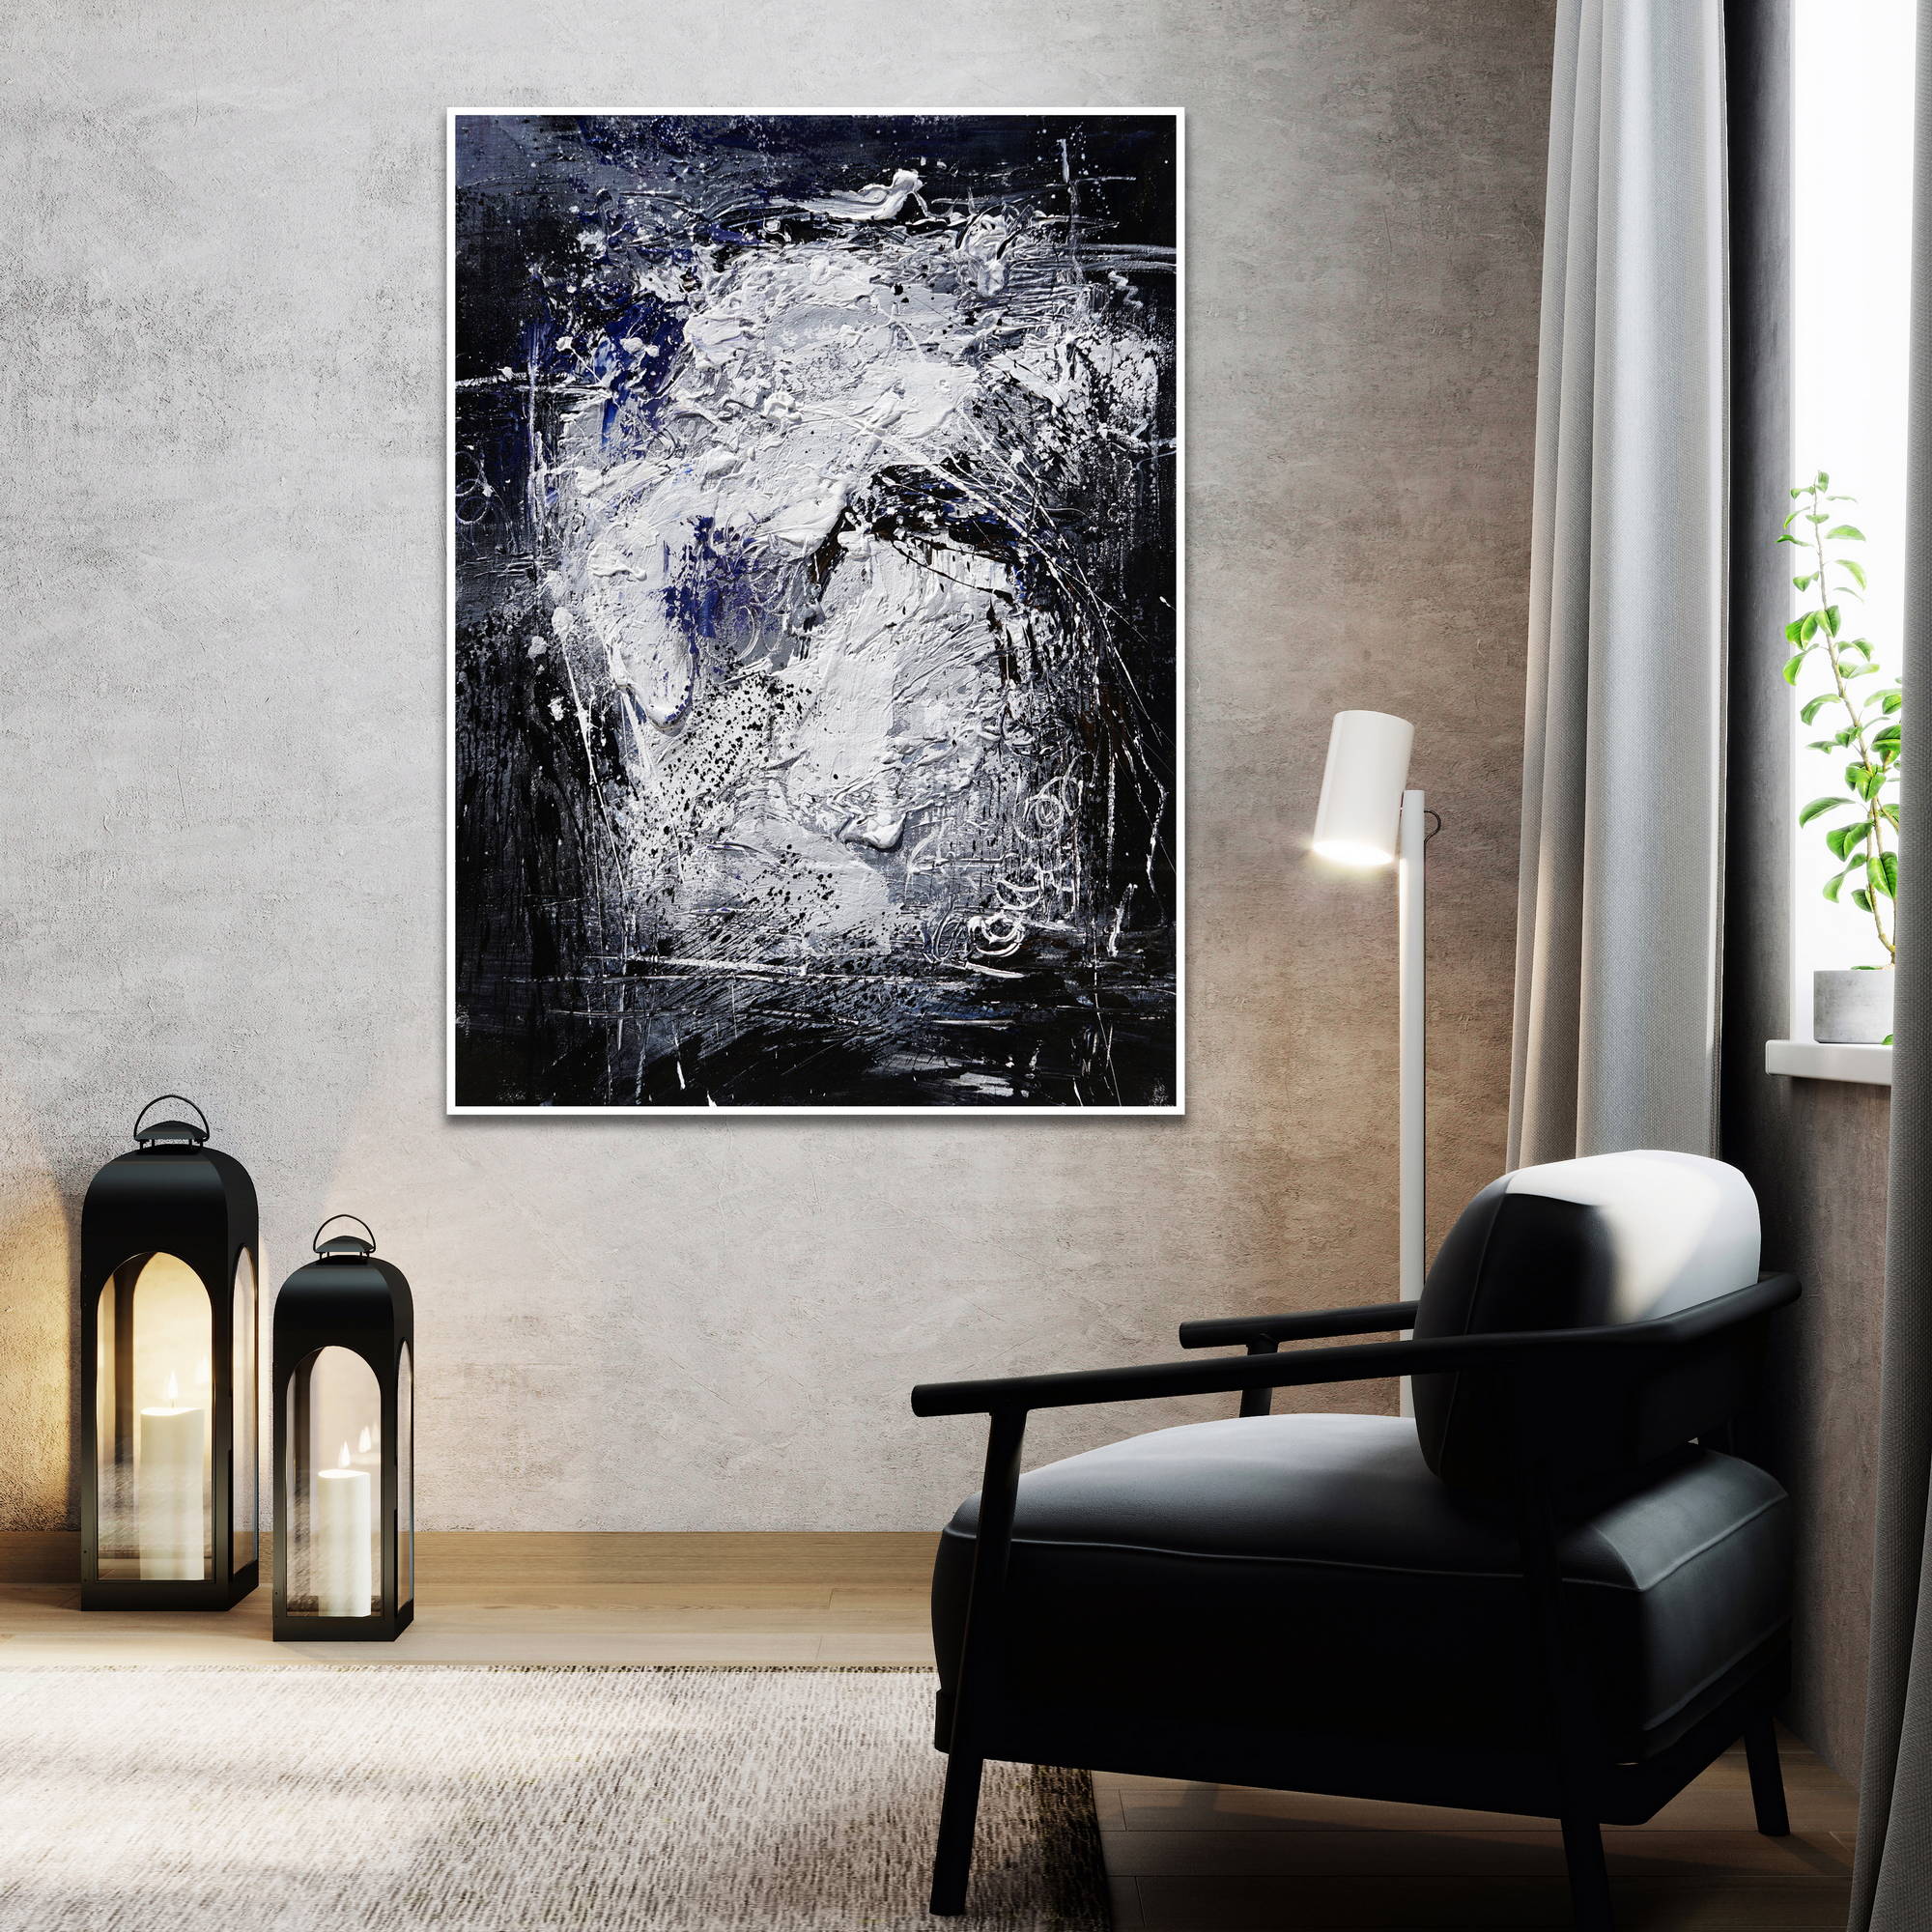 Hand painted Abstract in White and Blue 80x120cm